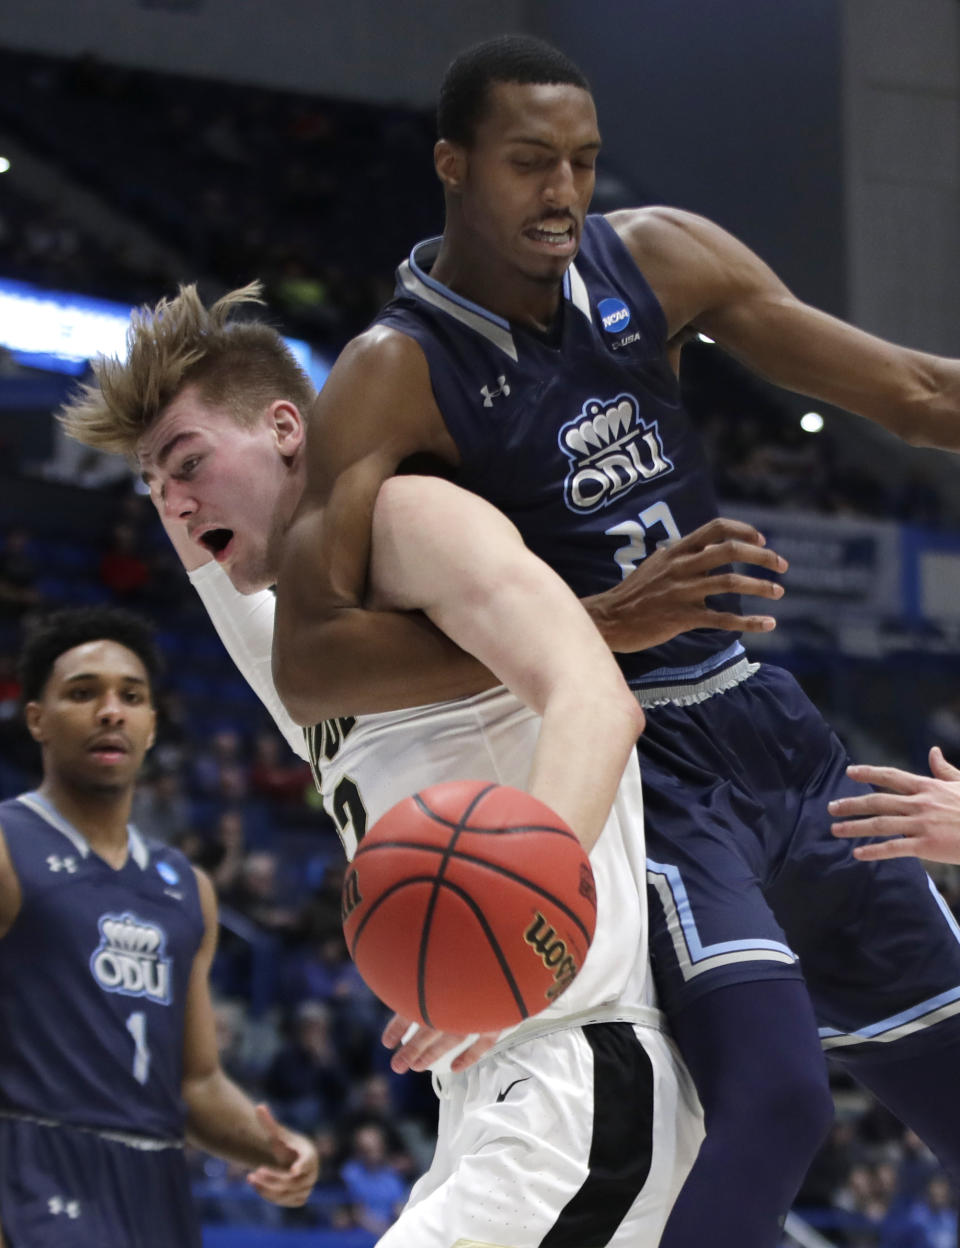 <p>Old Dominion’s Dajour Dickens (23) and Purdue’s Matt Haarms compete for a rebound during the second half of a first-round game in the NCAA men’s college basketball tournament Thursday, March 21, 2019, in Hartford, Conn. Purdue won 61-48. (AP Photo/Elise Amendola) </p>